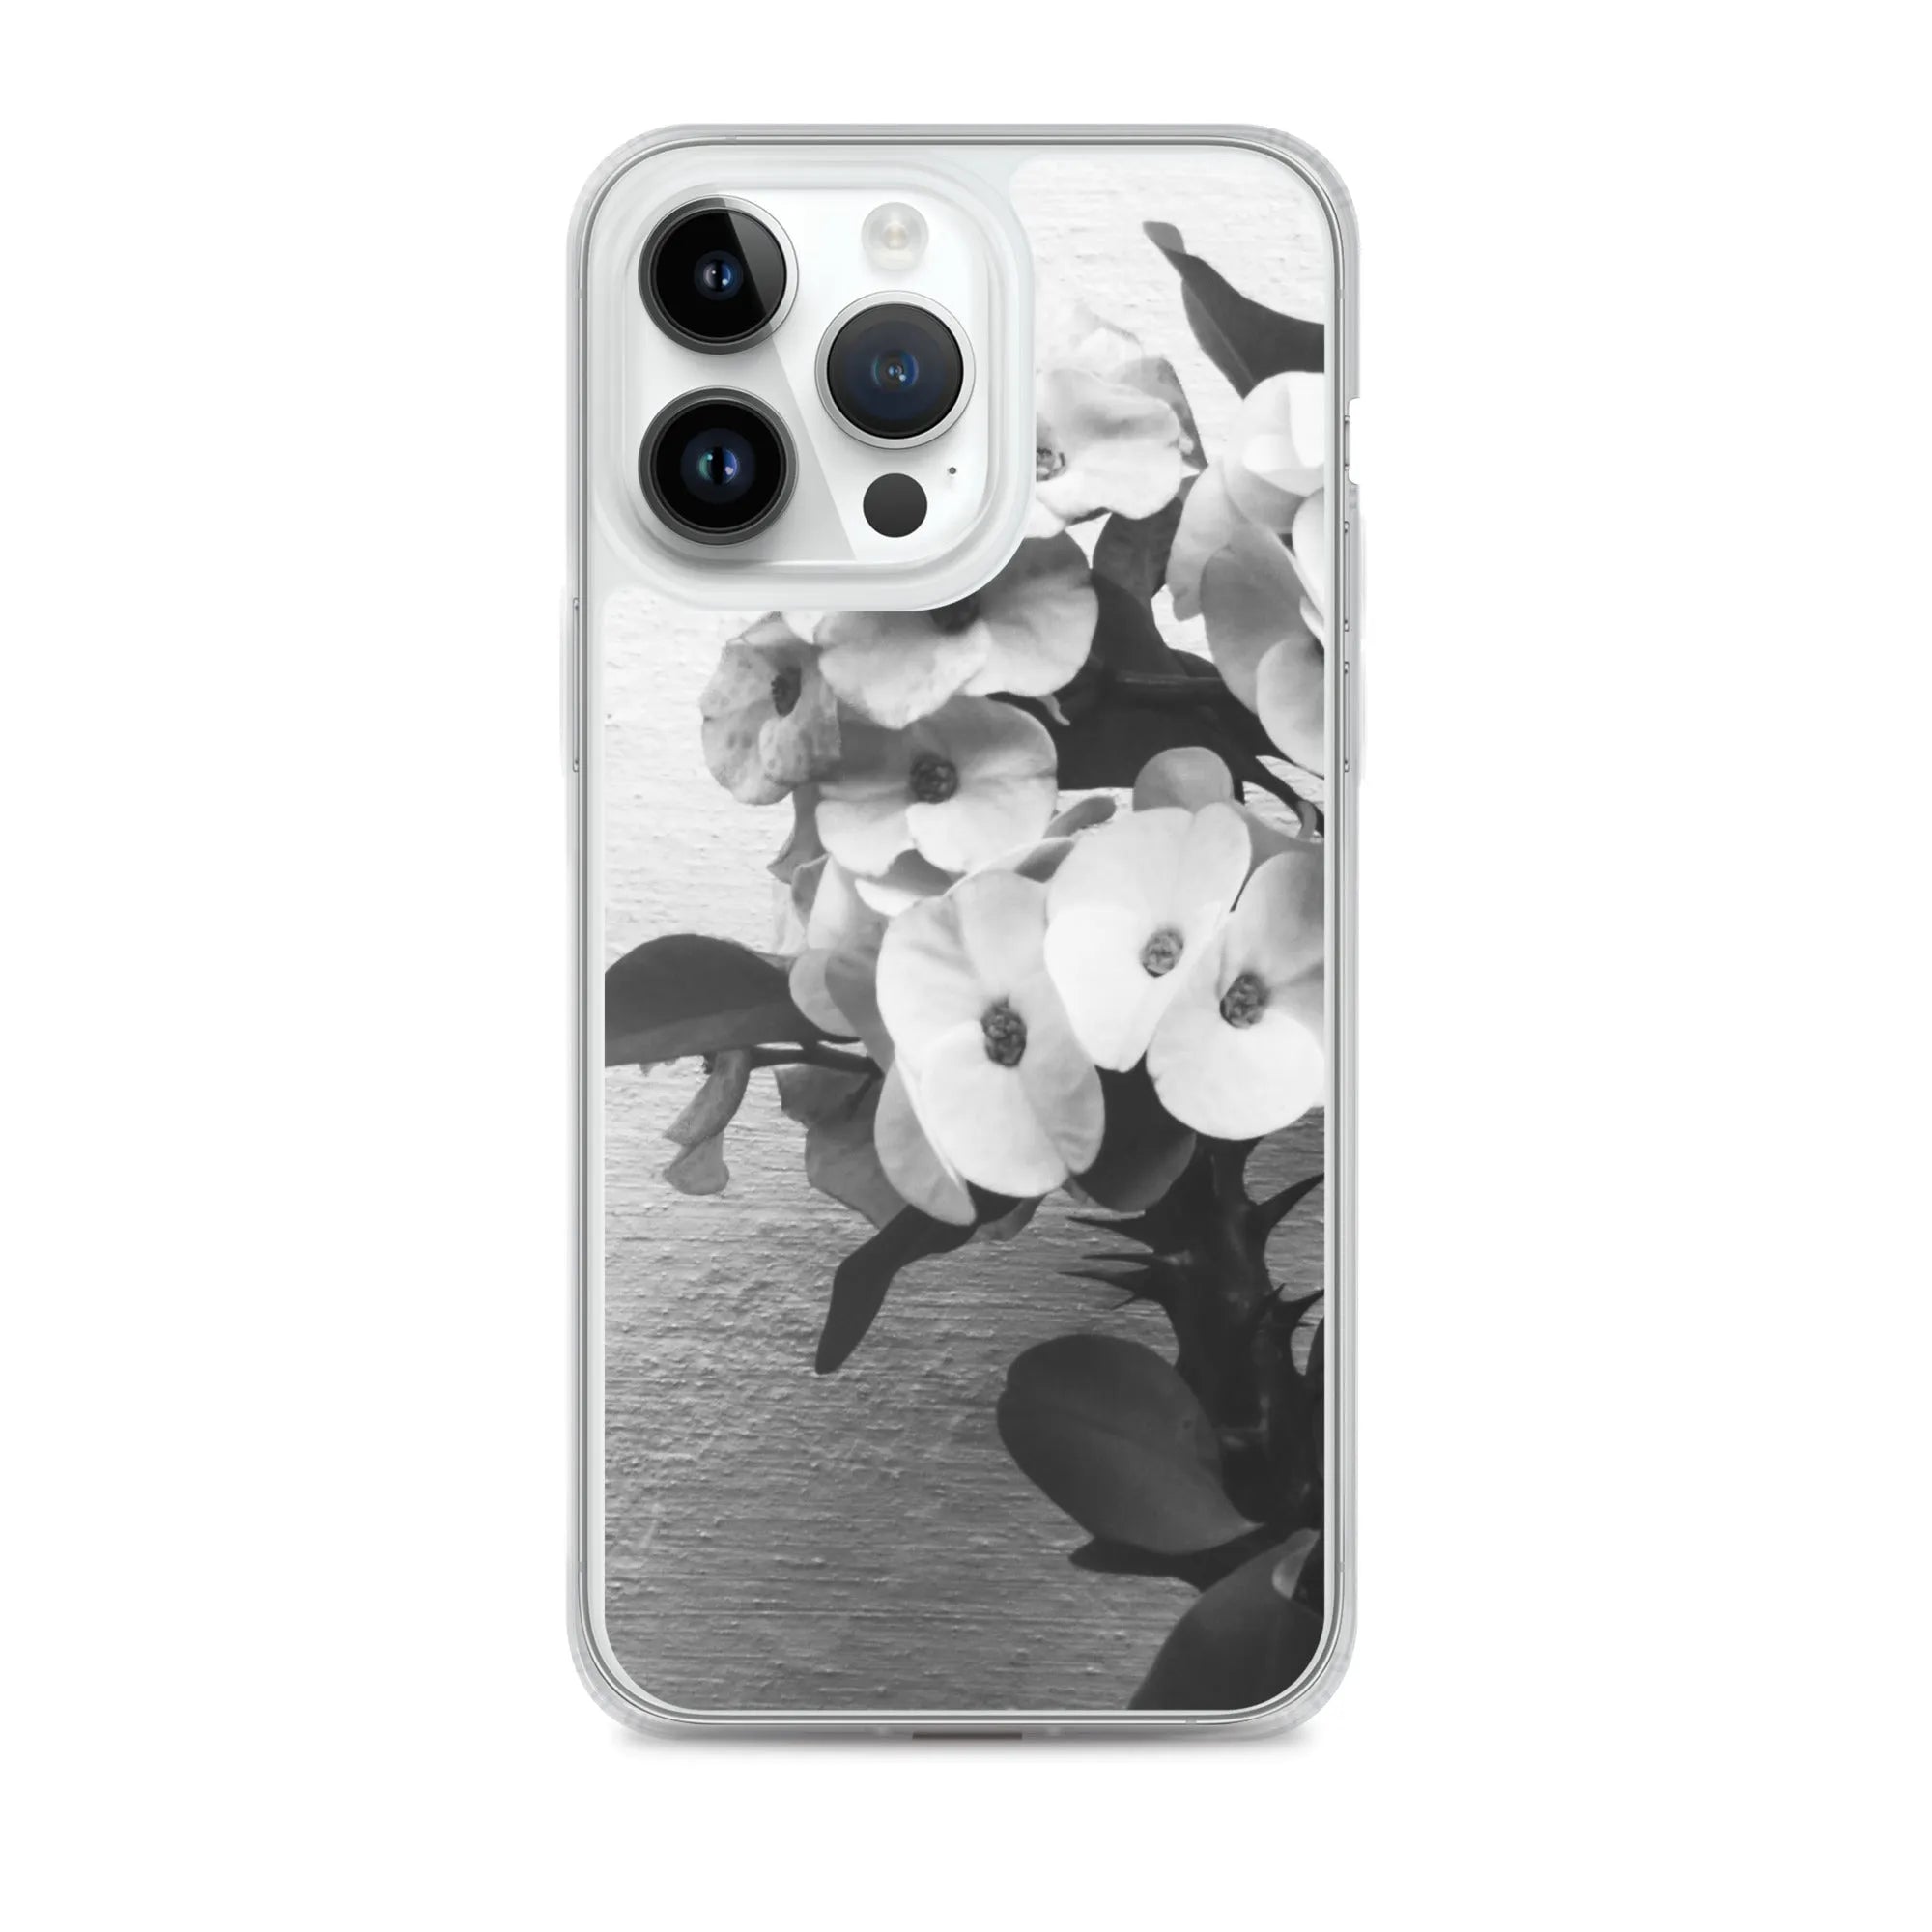 Wallflower Floral Iphone Case - Black And White - Iphone 14 Pro Max - Mobile Phone Cases - Aesthetic Art